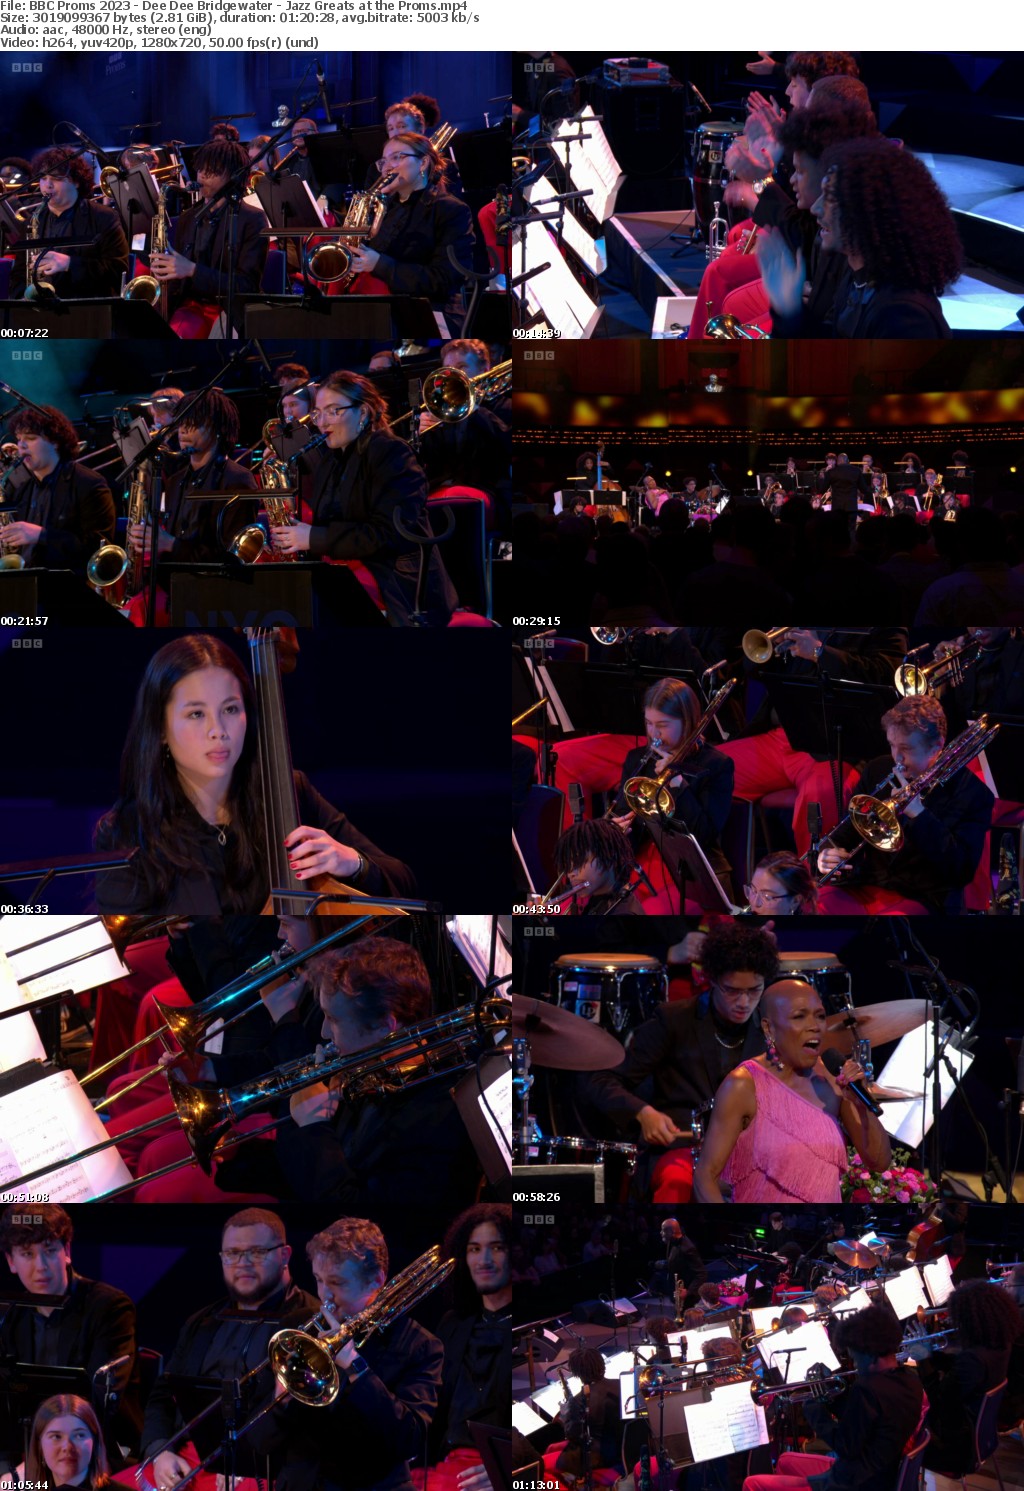 BBC Proms 2023 - Dee Dee Bridgewater - Jazz Greats at the Proms (1280x720p HD, 50fps, soft Eng subs)